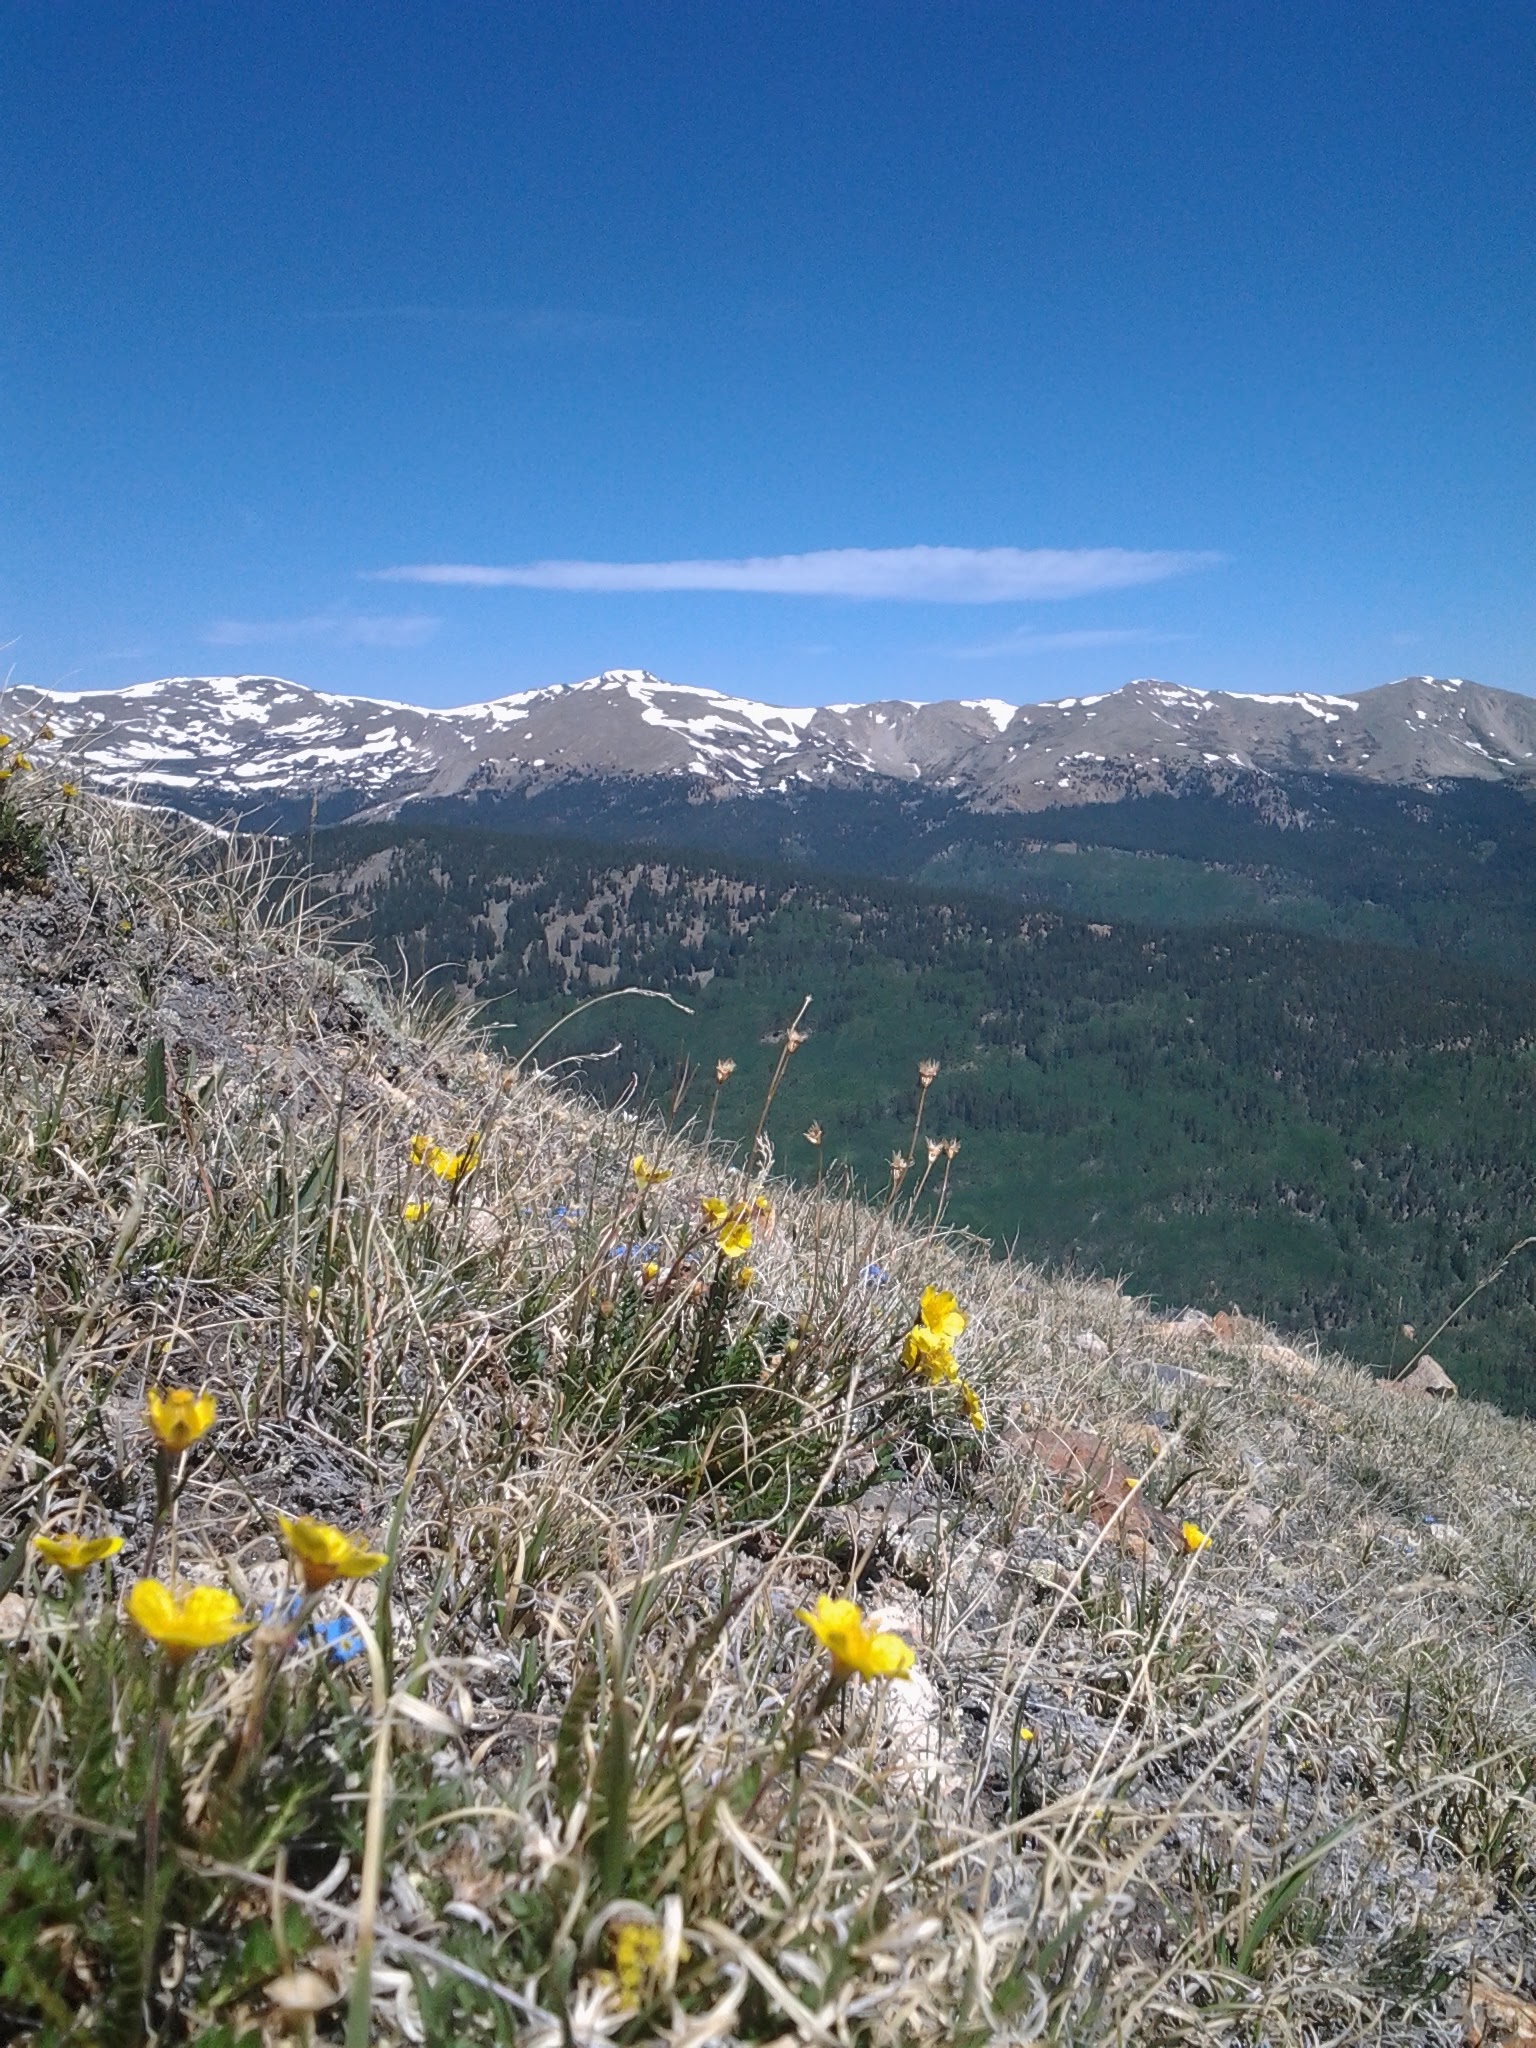 Small yellow and purple wildflowers growing along the side of a mountain side, sun is shinning, sky is blue, snow peaked mountains in the distance.